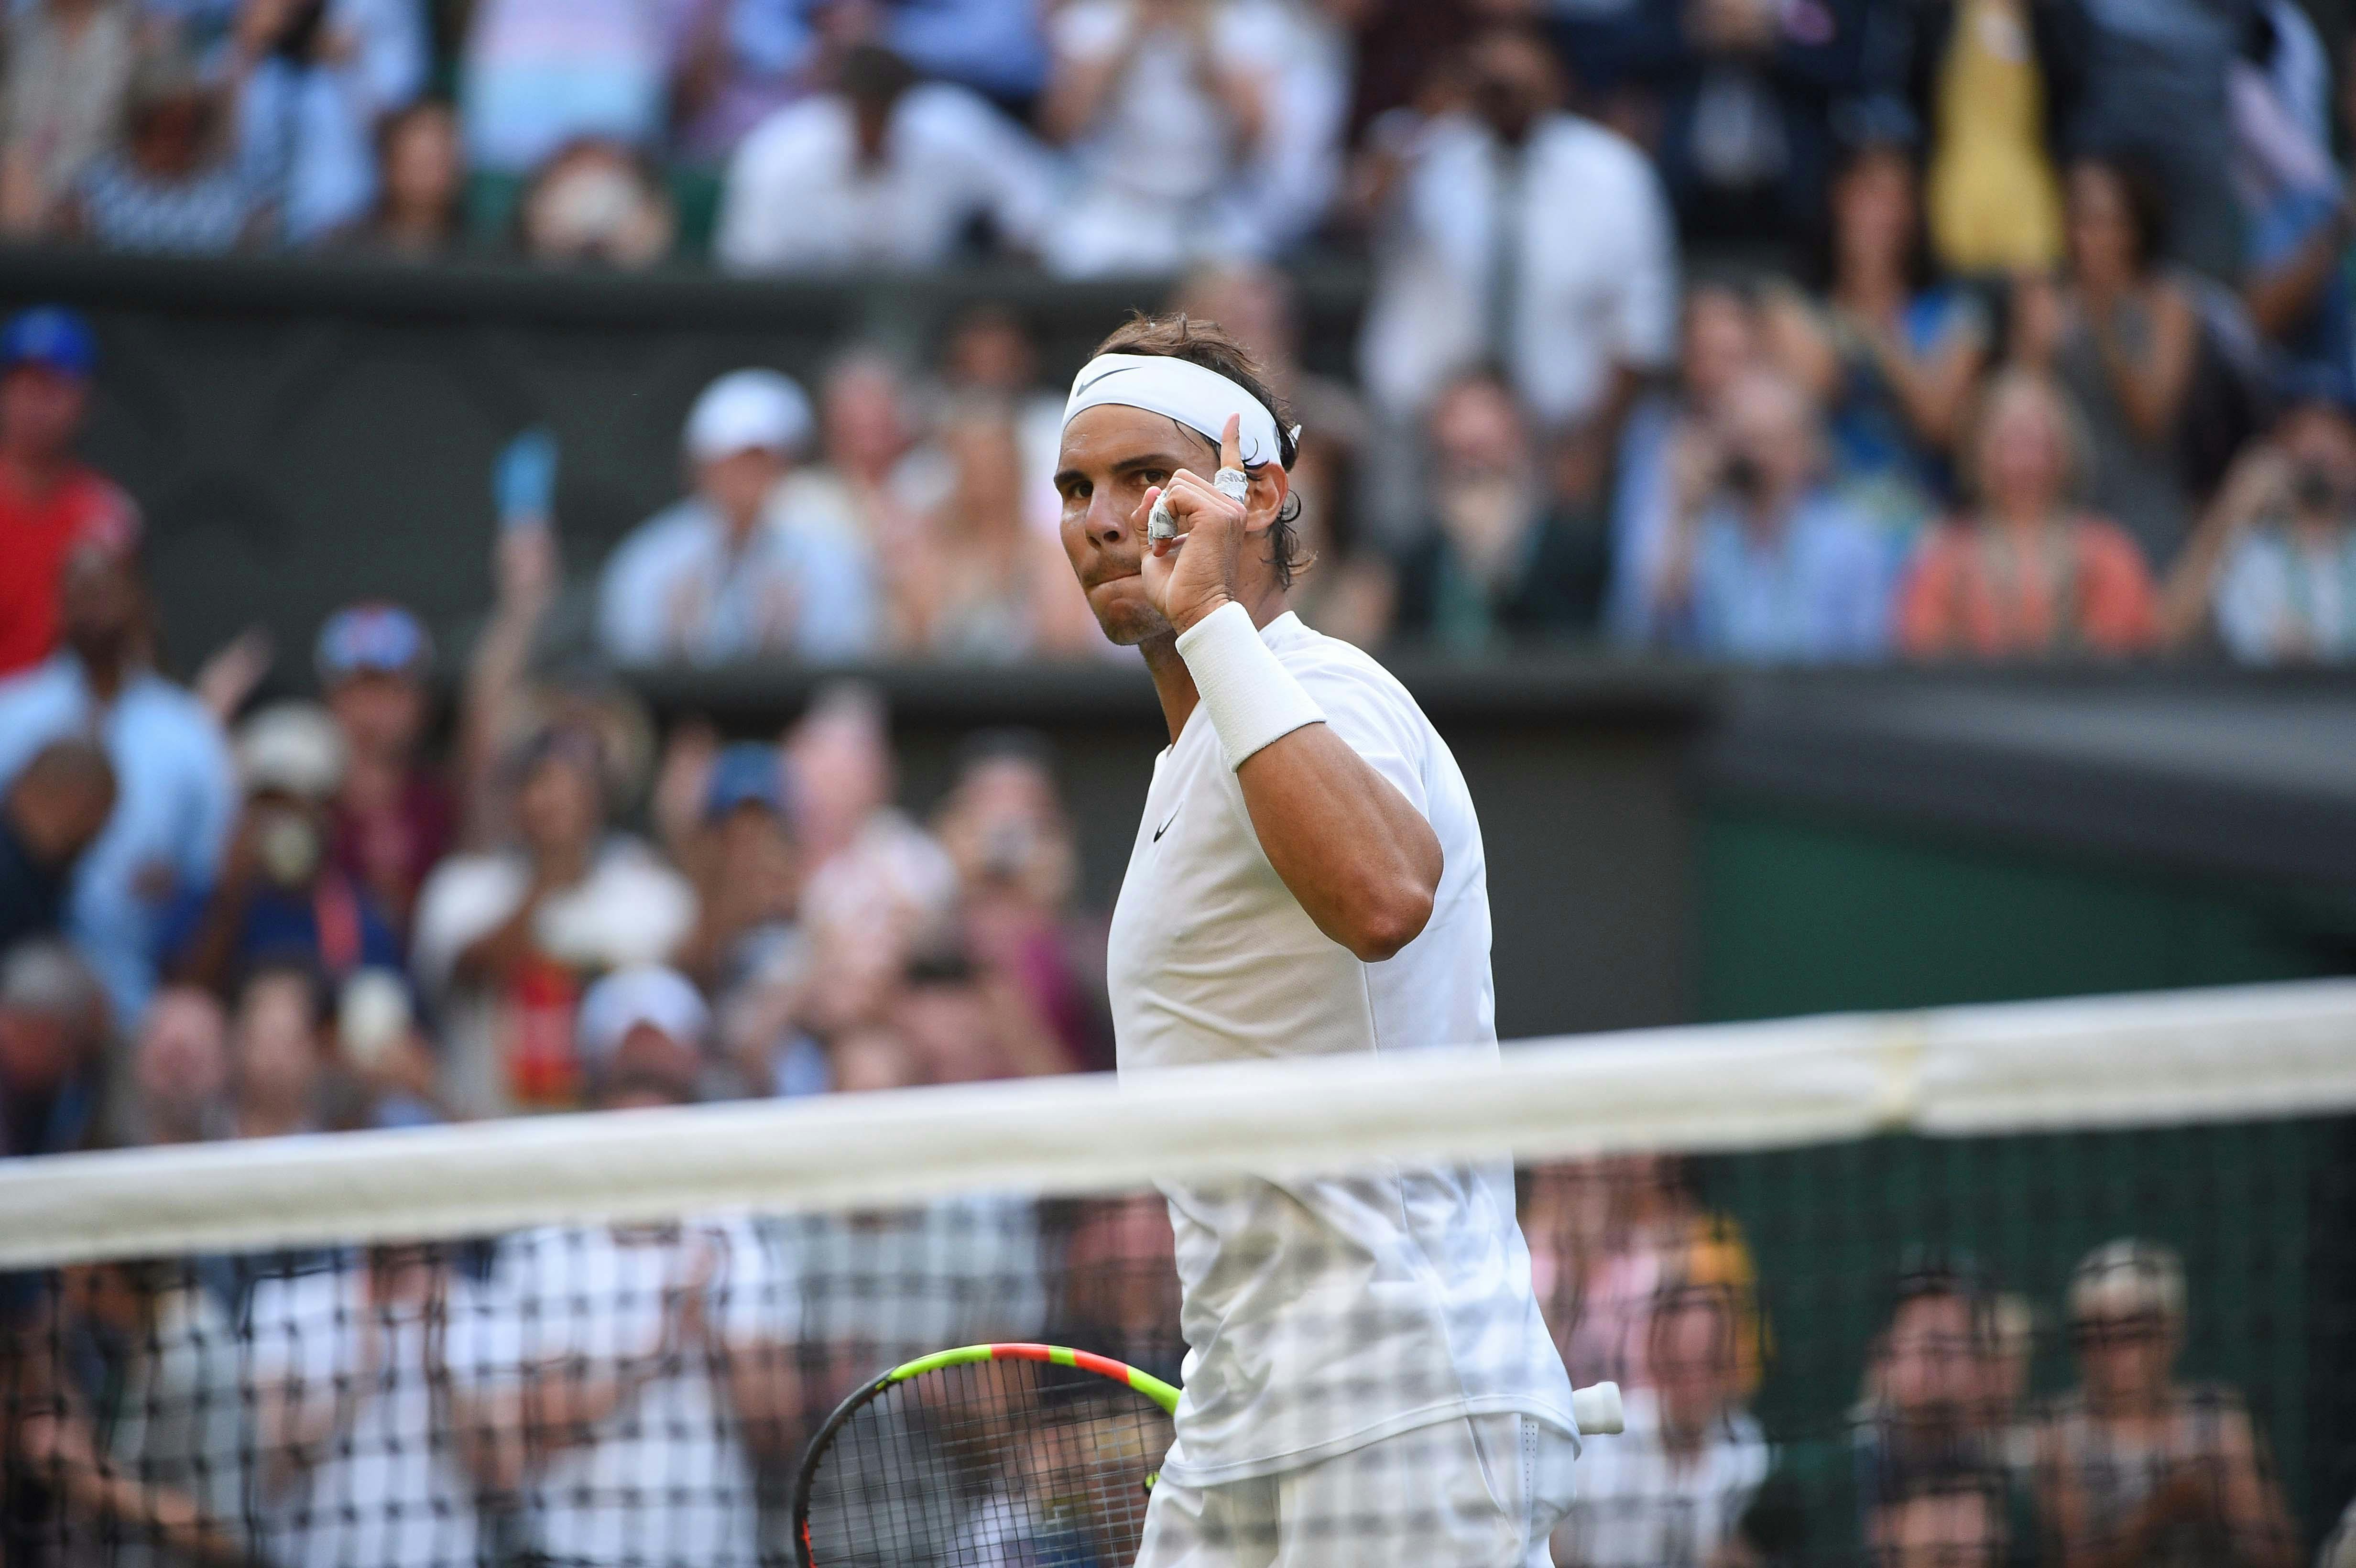 Rafael Nadal happy and relieved after winning against Nick Kyrgios at Wimbledon 2019